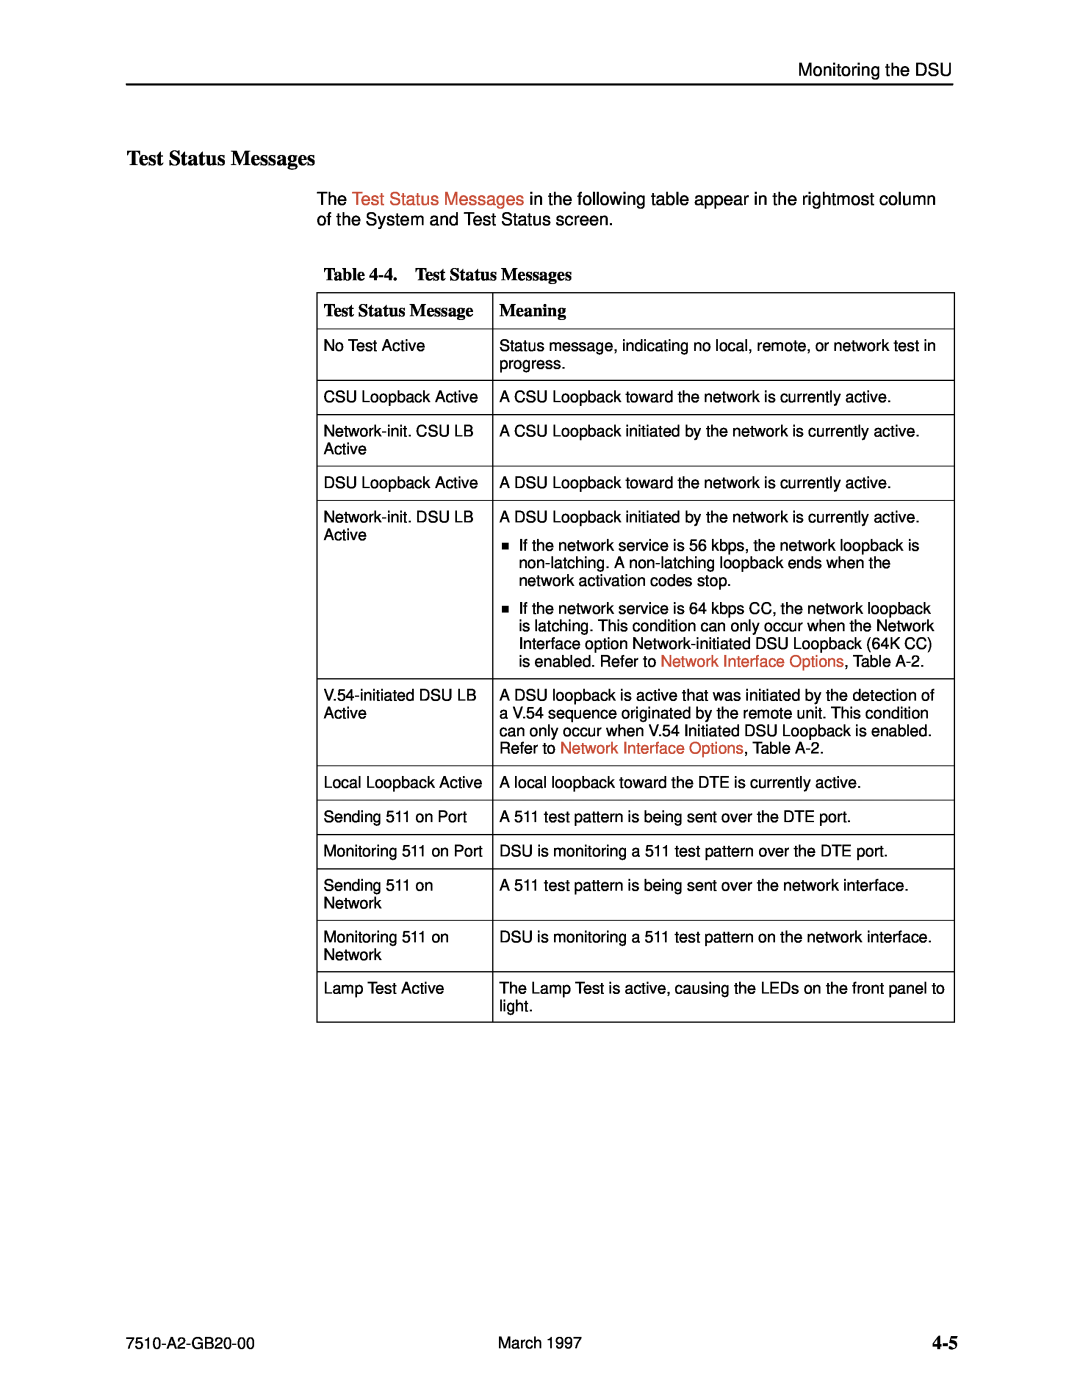 Paradyne 727 manual 4.Test Status Messages, Meaning, Refer to Network Interface Options, Table A-2 